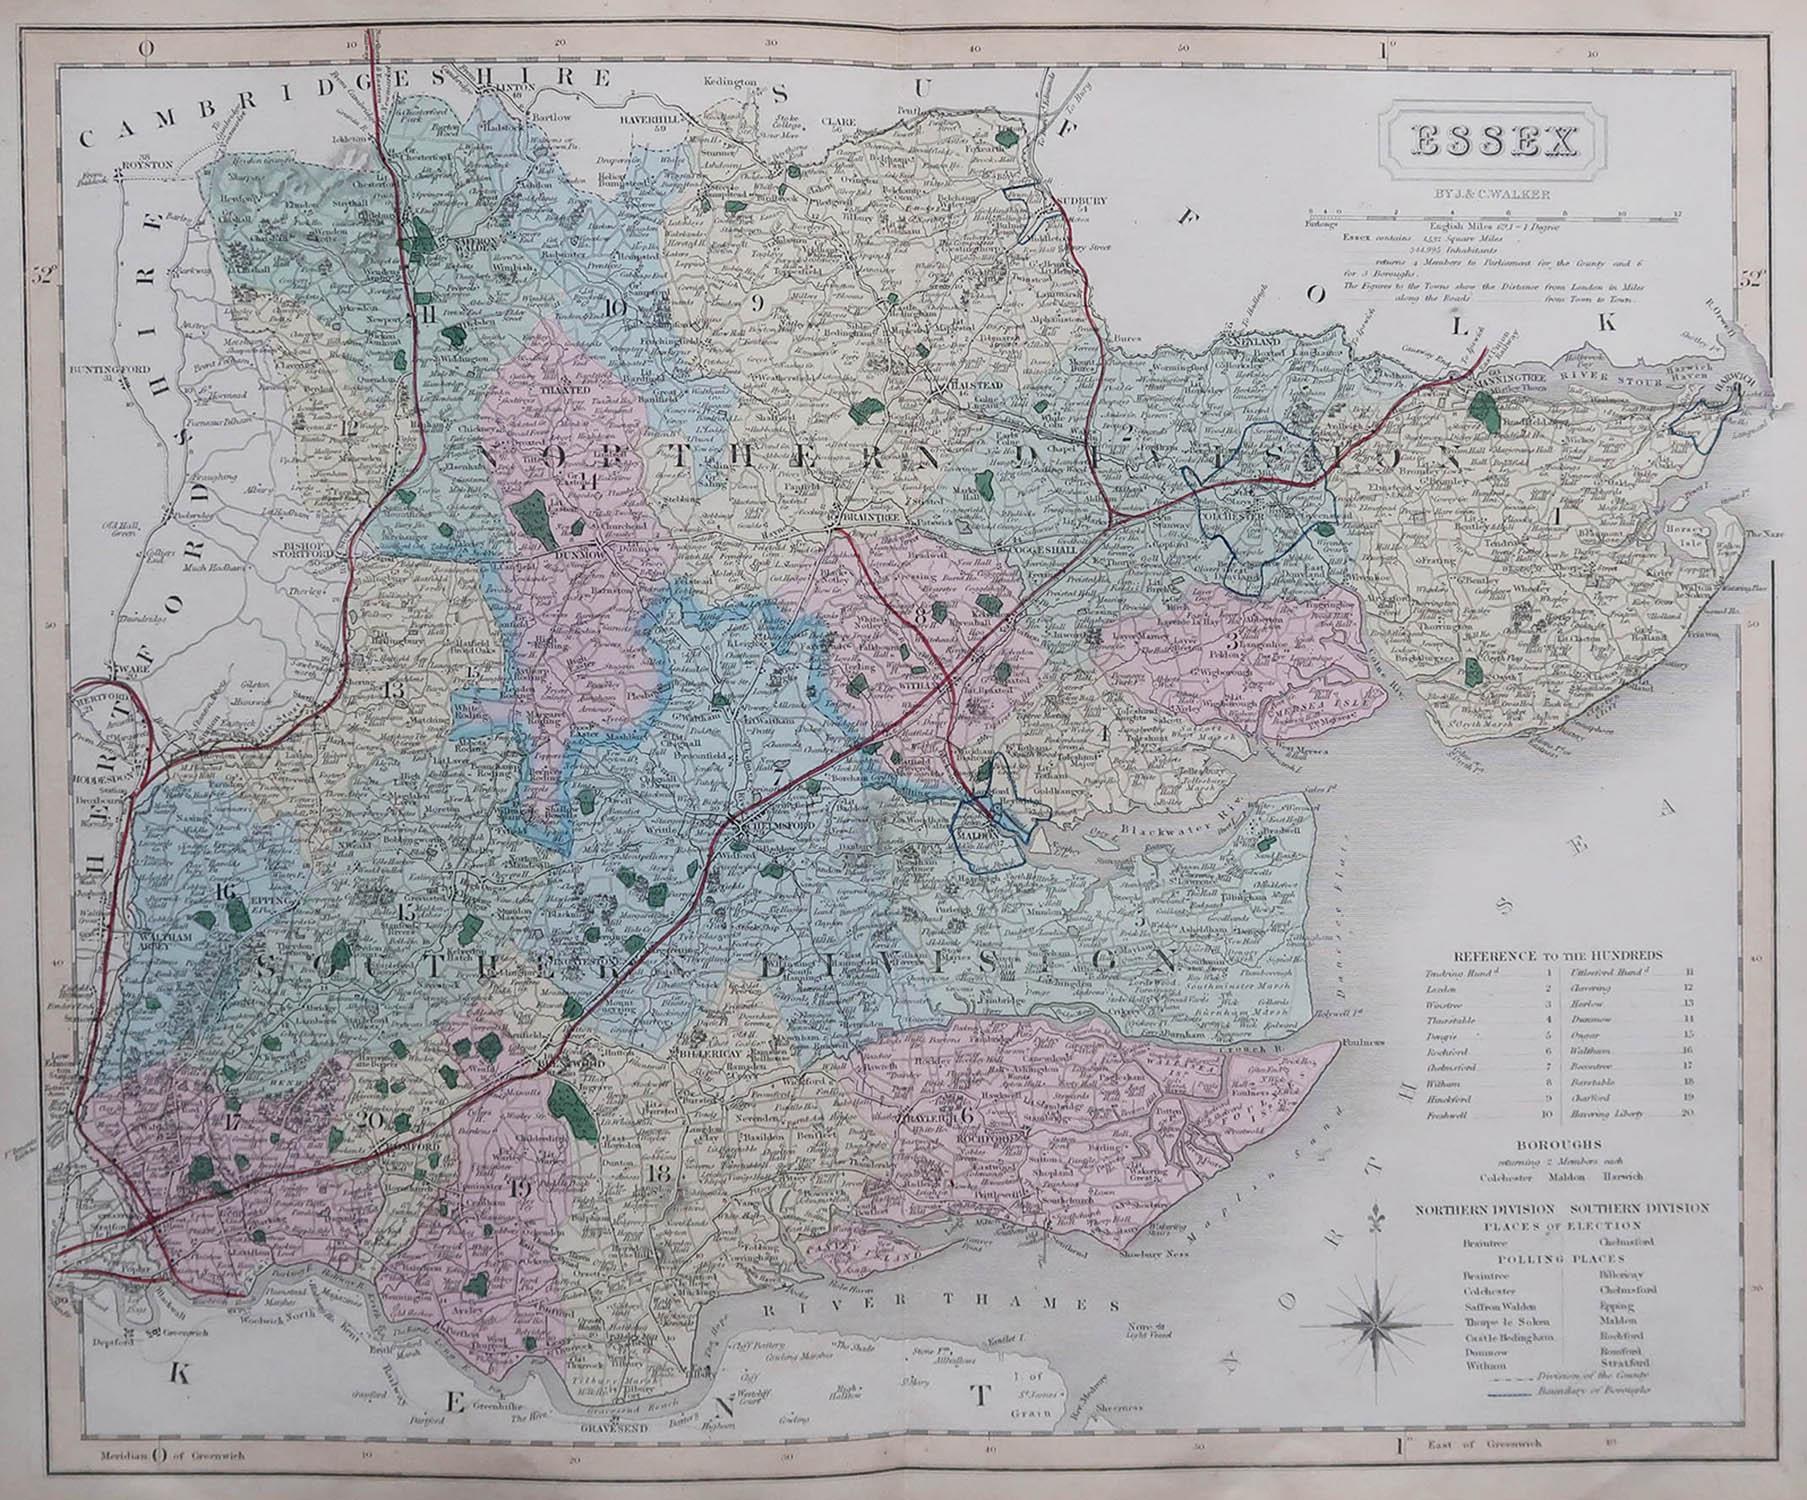 Great map of Essex

Original colour

By J & C Walker

Published by Longman, Rees, Orme, Brown & Co. 1851

Unframed.




